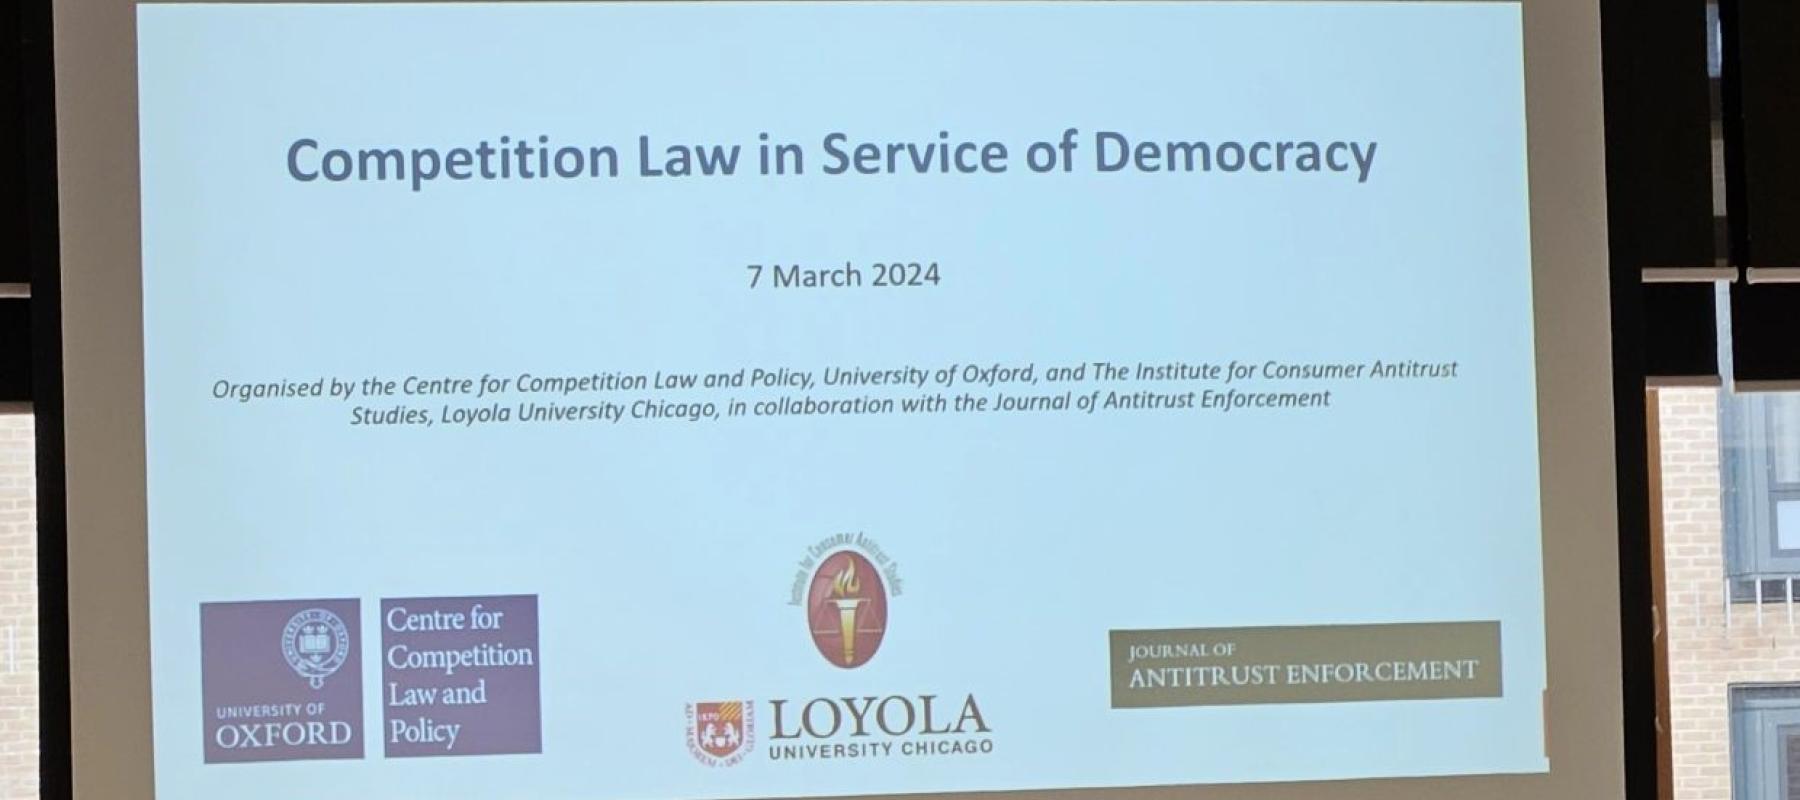 CCLP Democracy and competition event